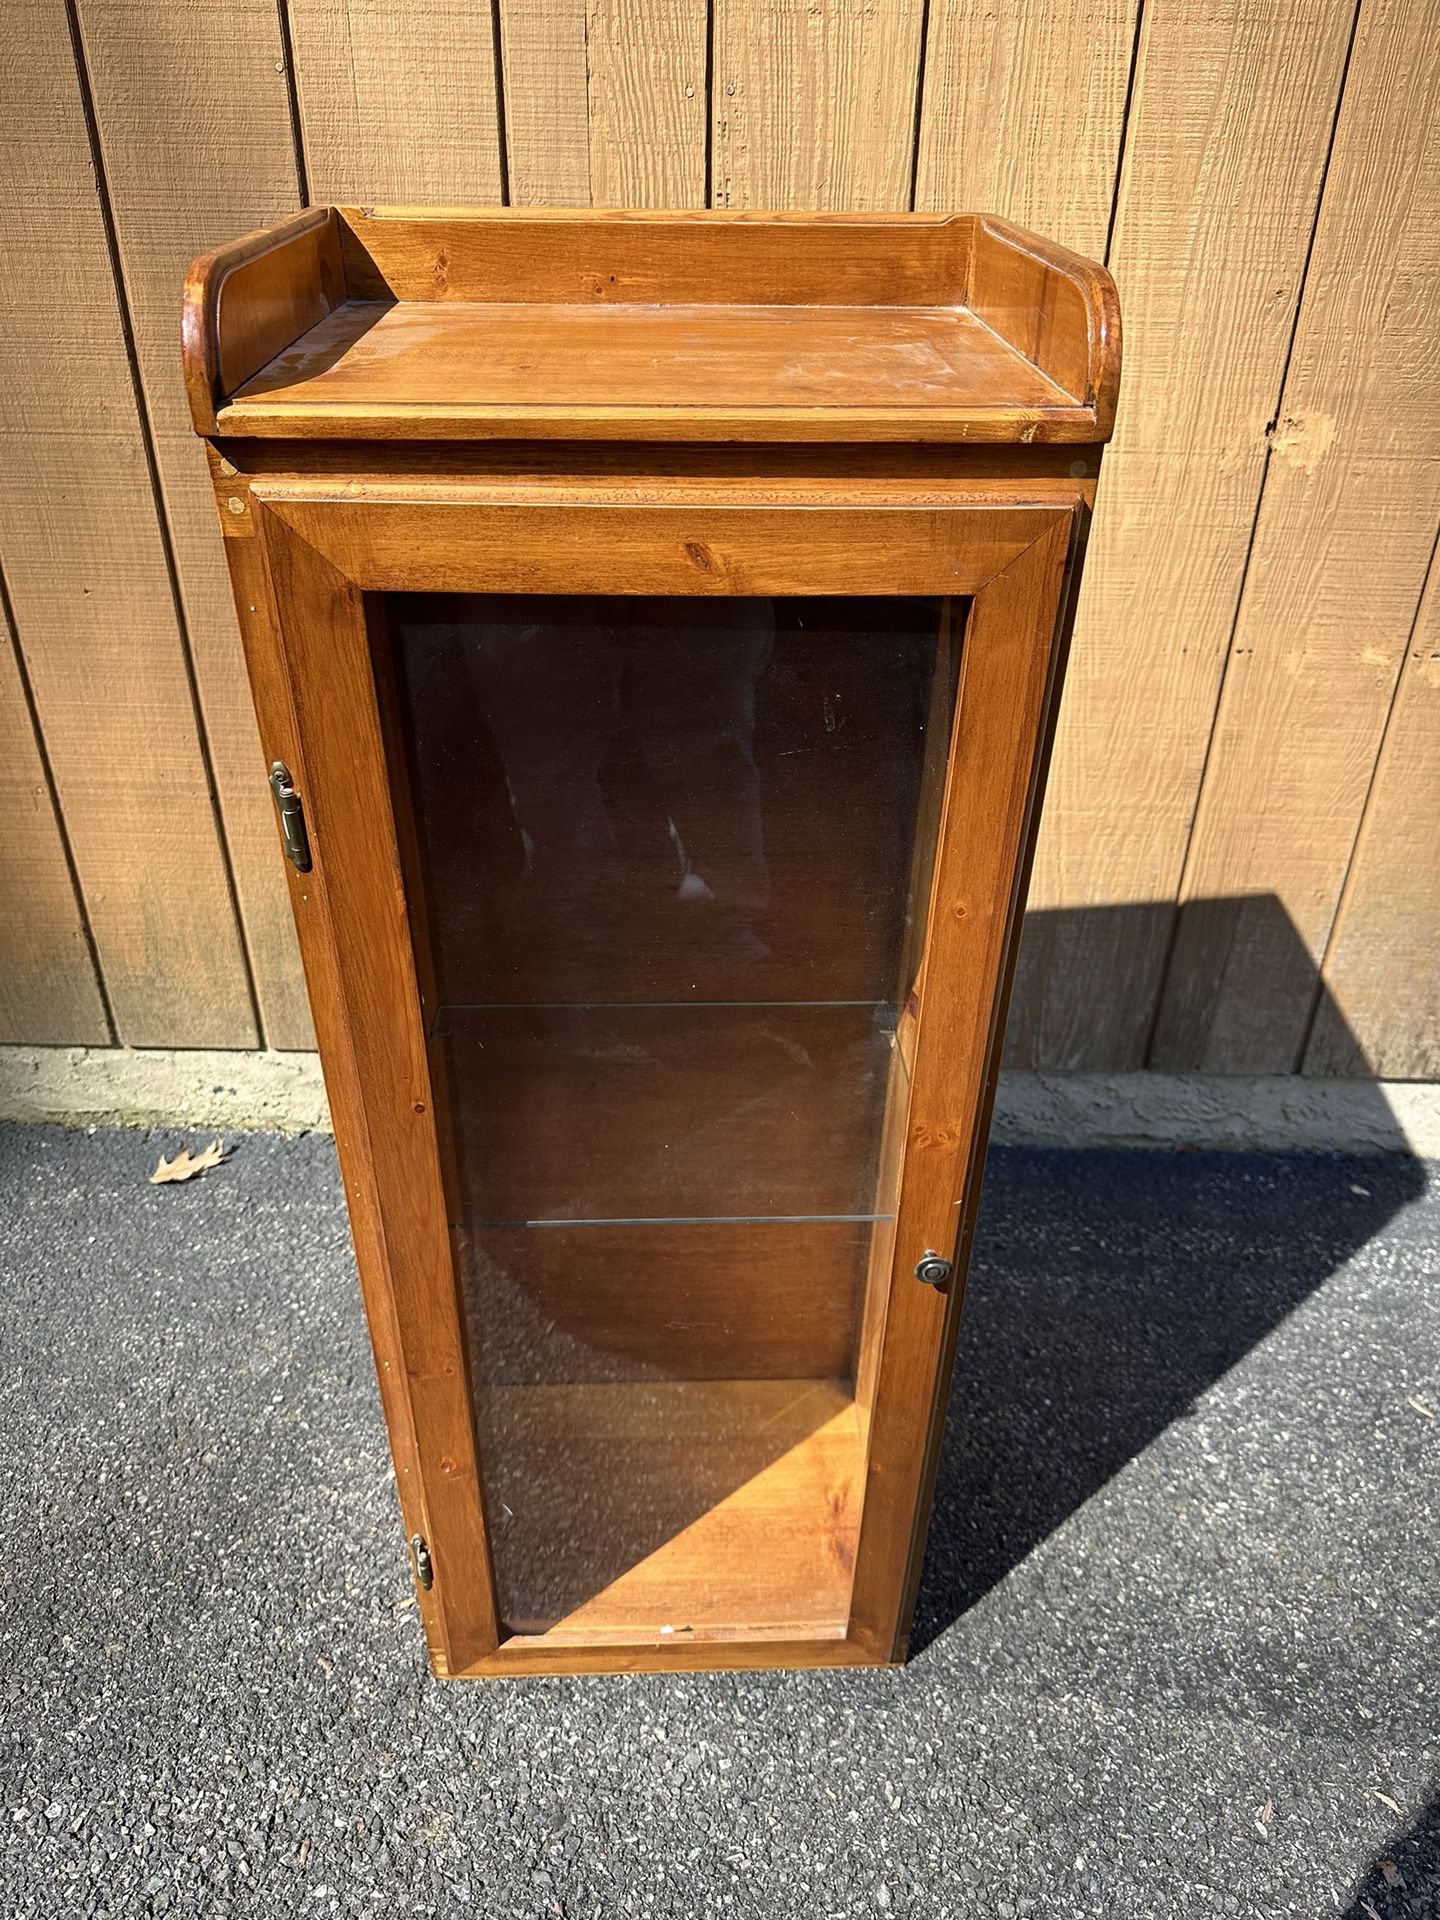 Wood Cabinet with Glass Shelf (lighted)